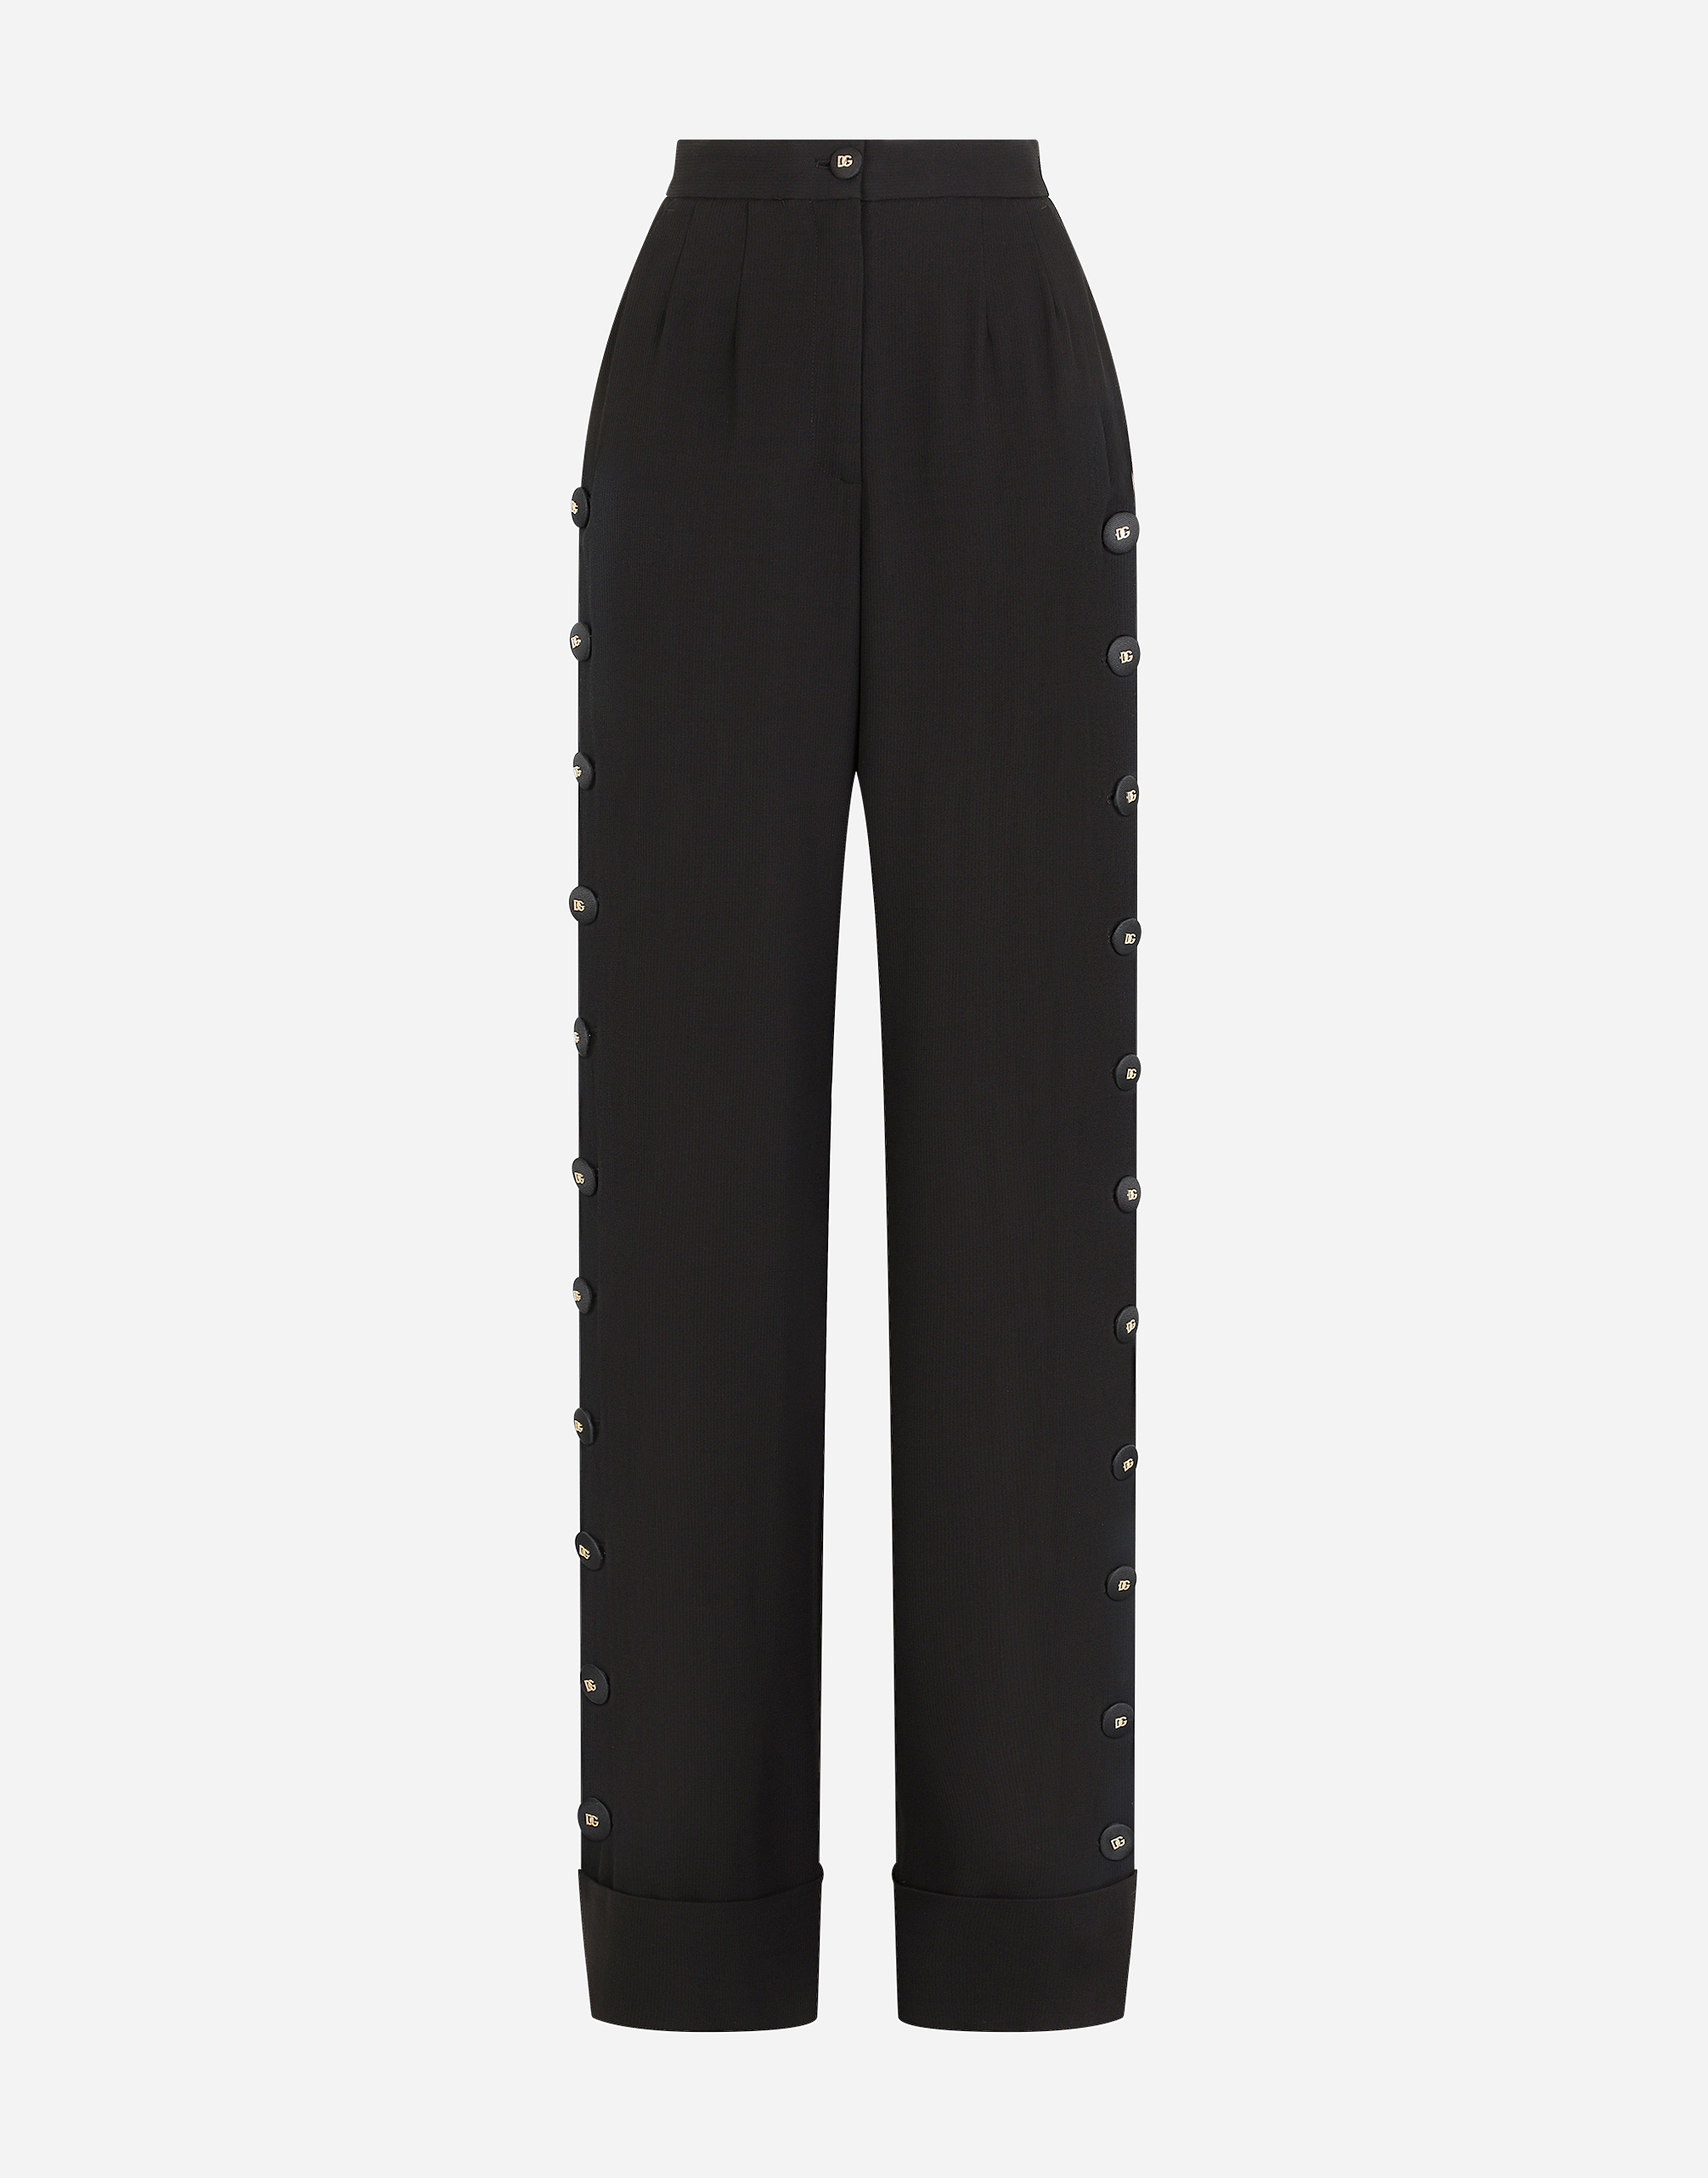 Piqué palazzo pants with buttons and turn-ups in Black